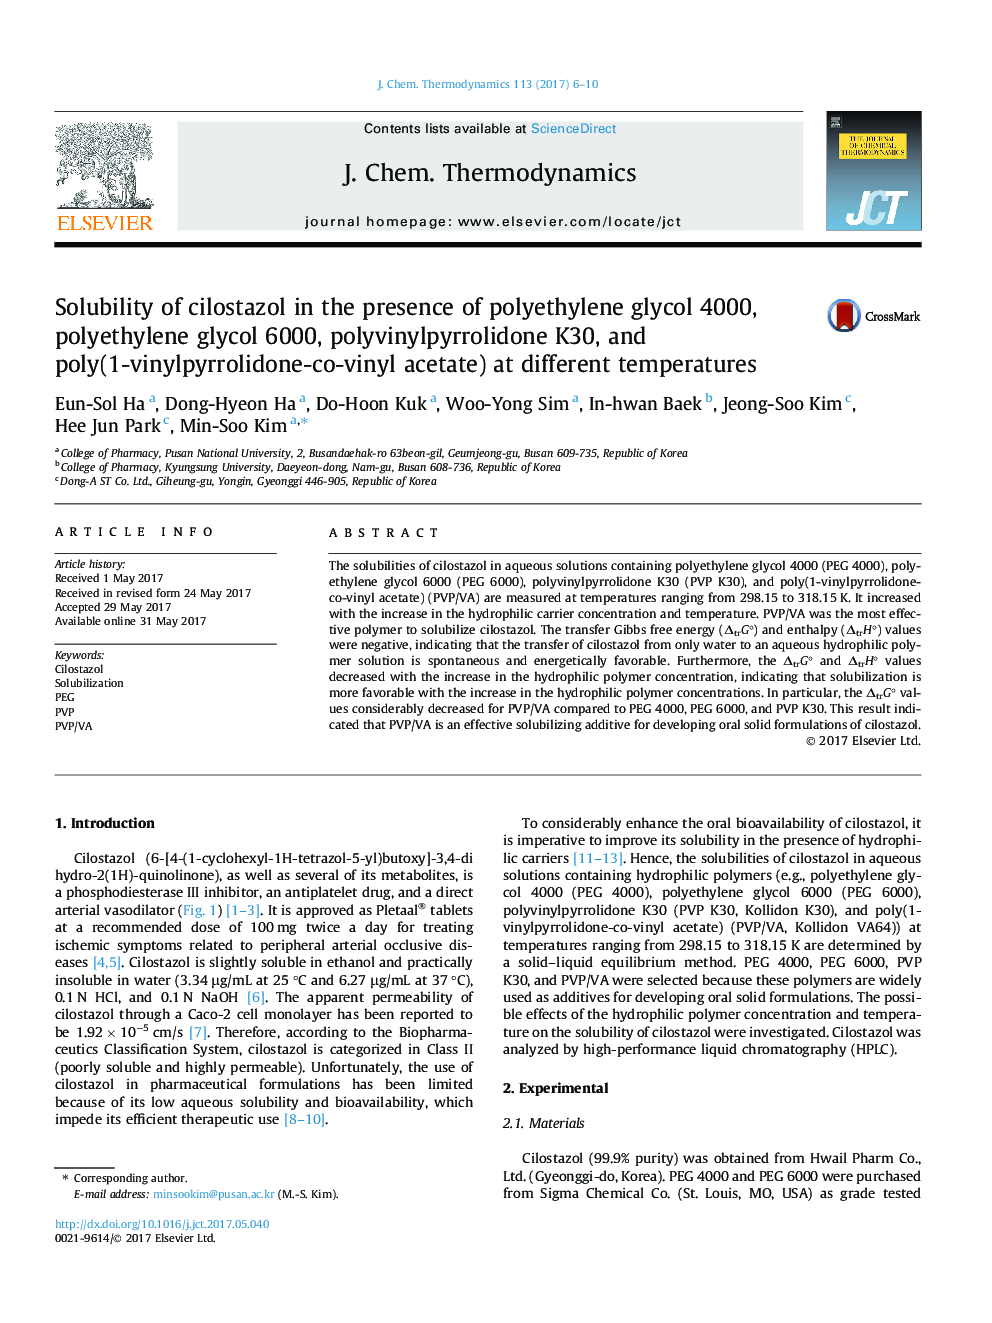 Solubility of cilostazol in the presence of polyethylene glycol 4000, polyethylene glycol 6000, polyvinylpyrrolidone K30, and poly(1-vinylpyrrolidone-co-vinyl acetate) at different temperatures